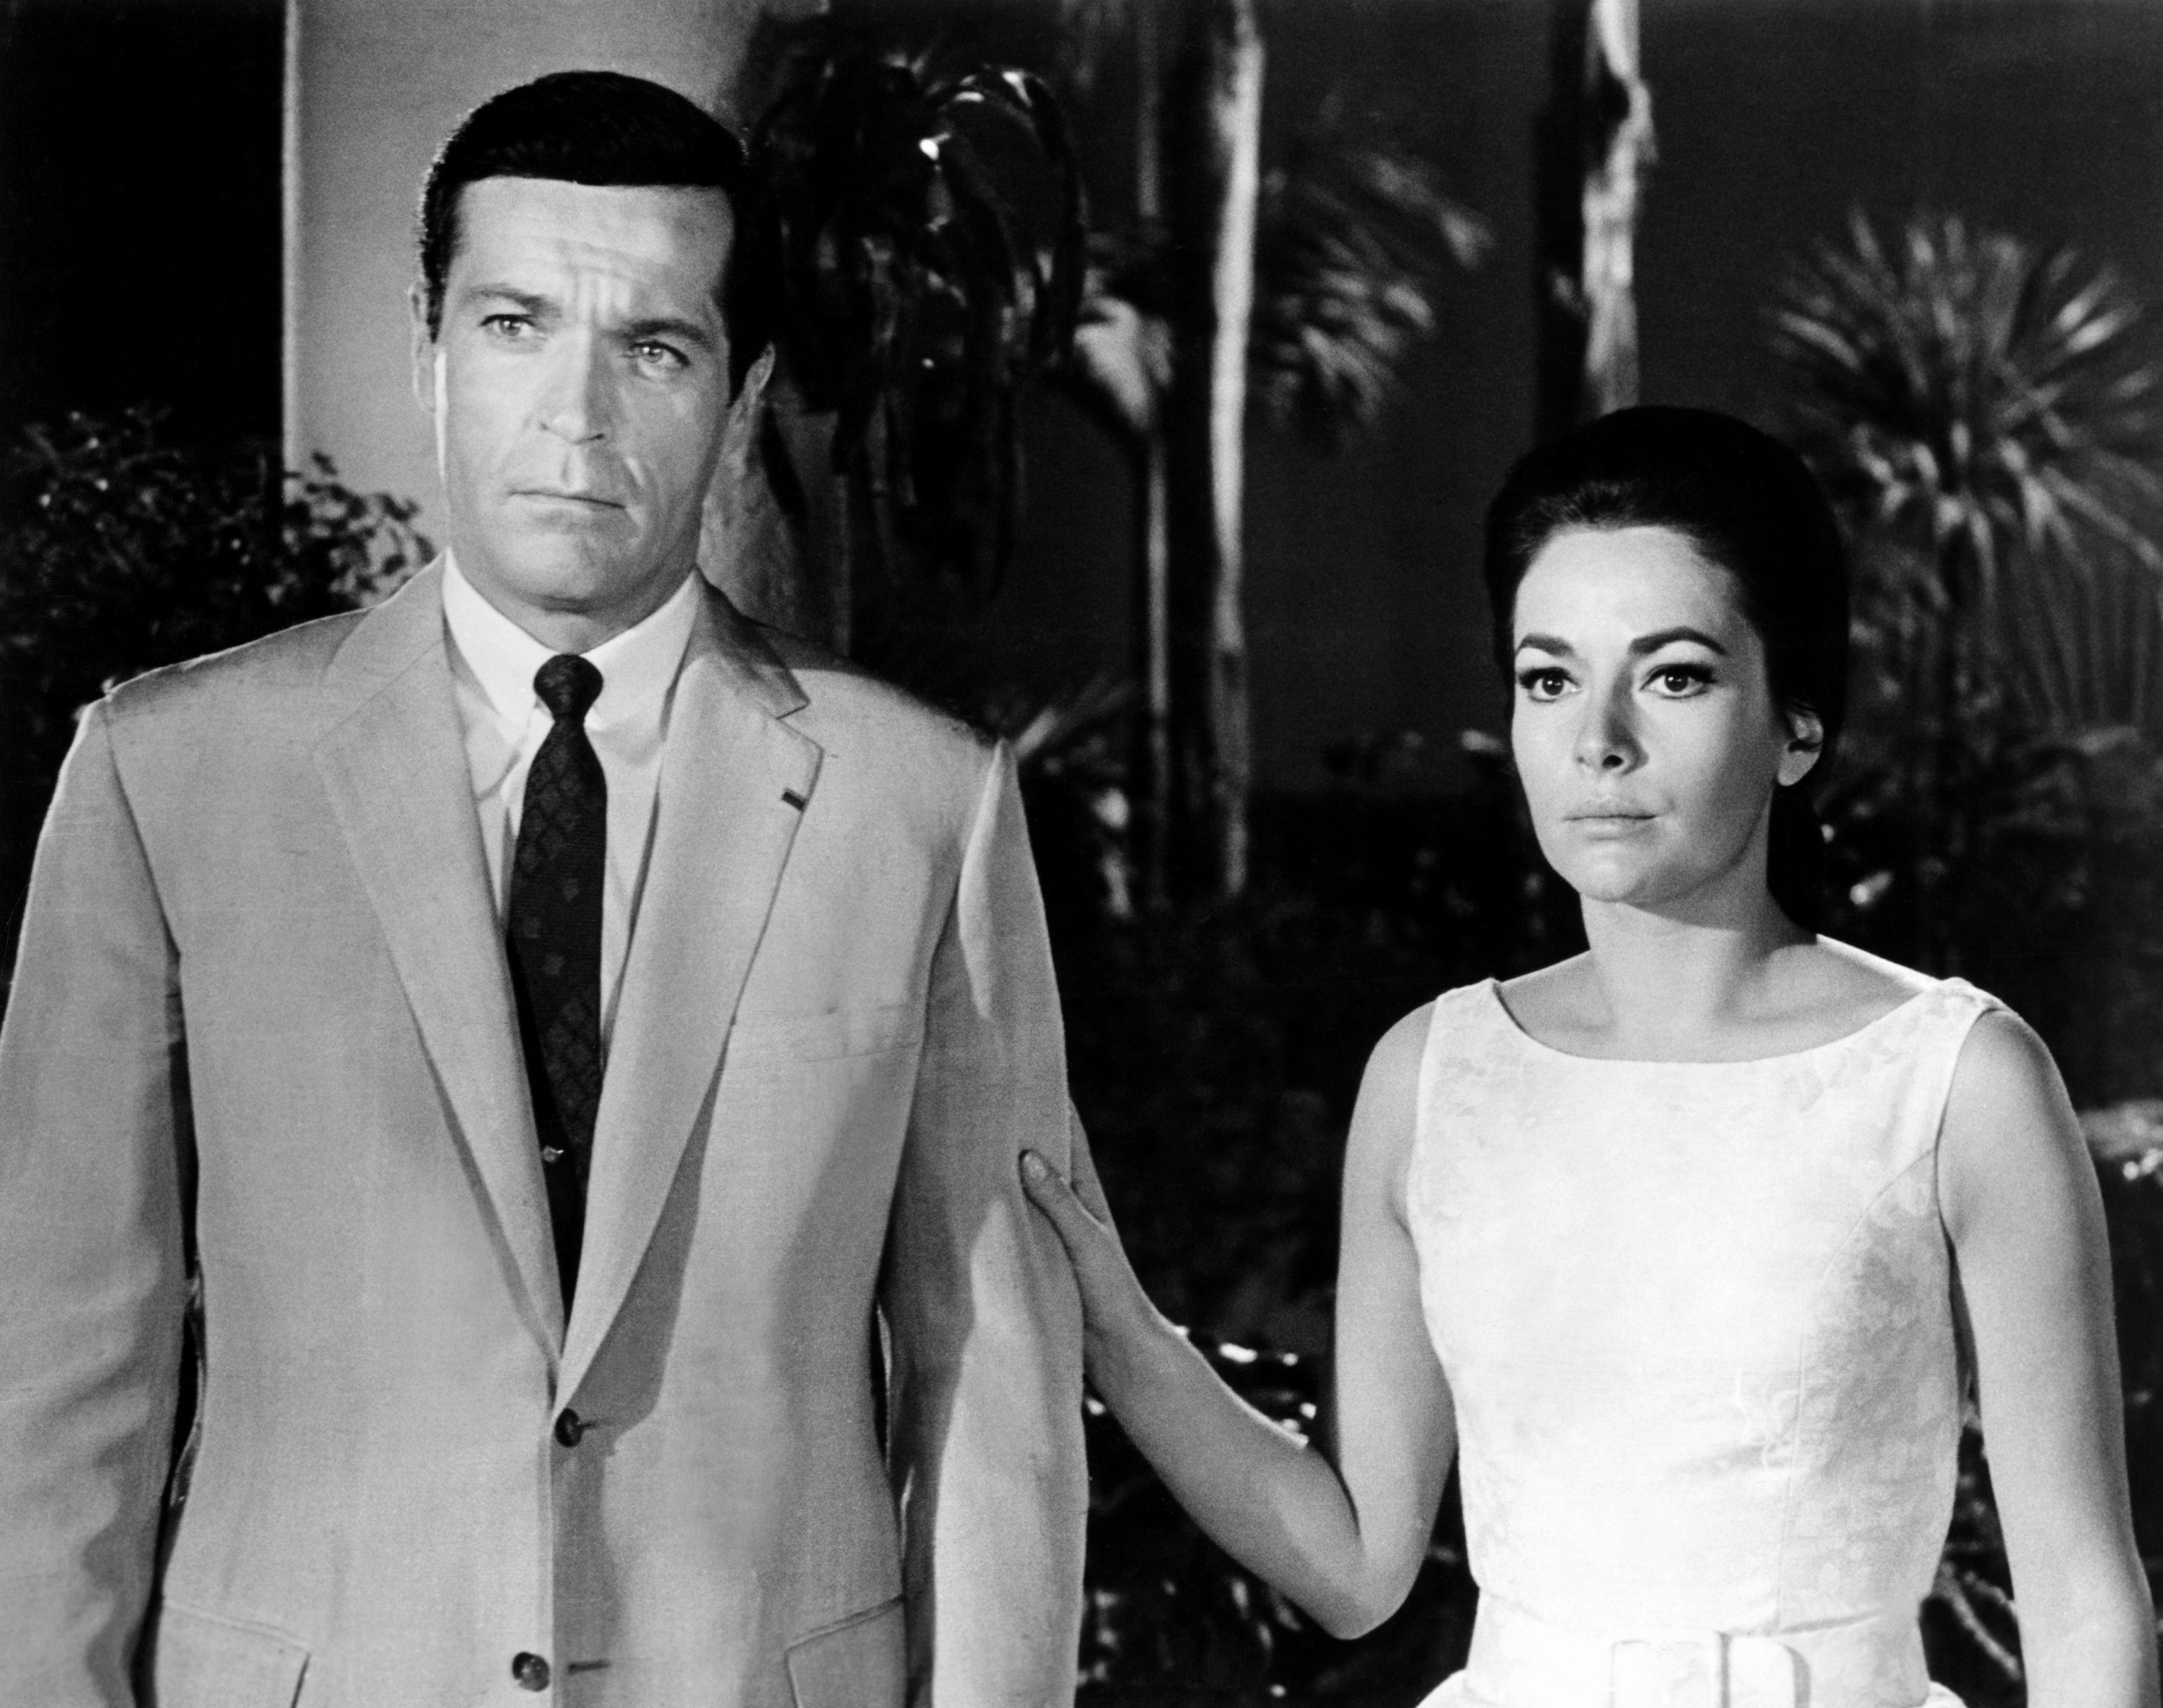 Frederick Stafford and Karin Dor standing next to each other.